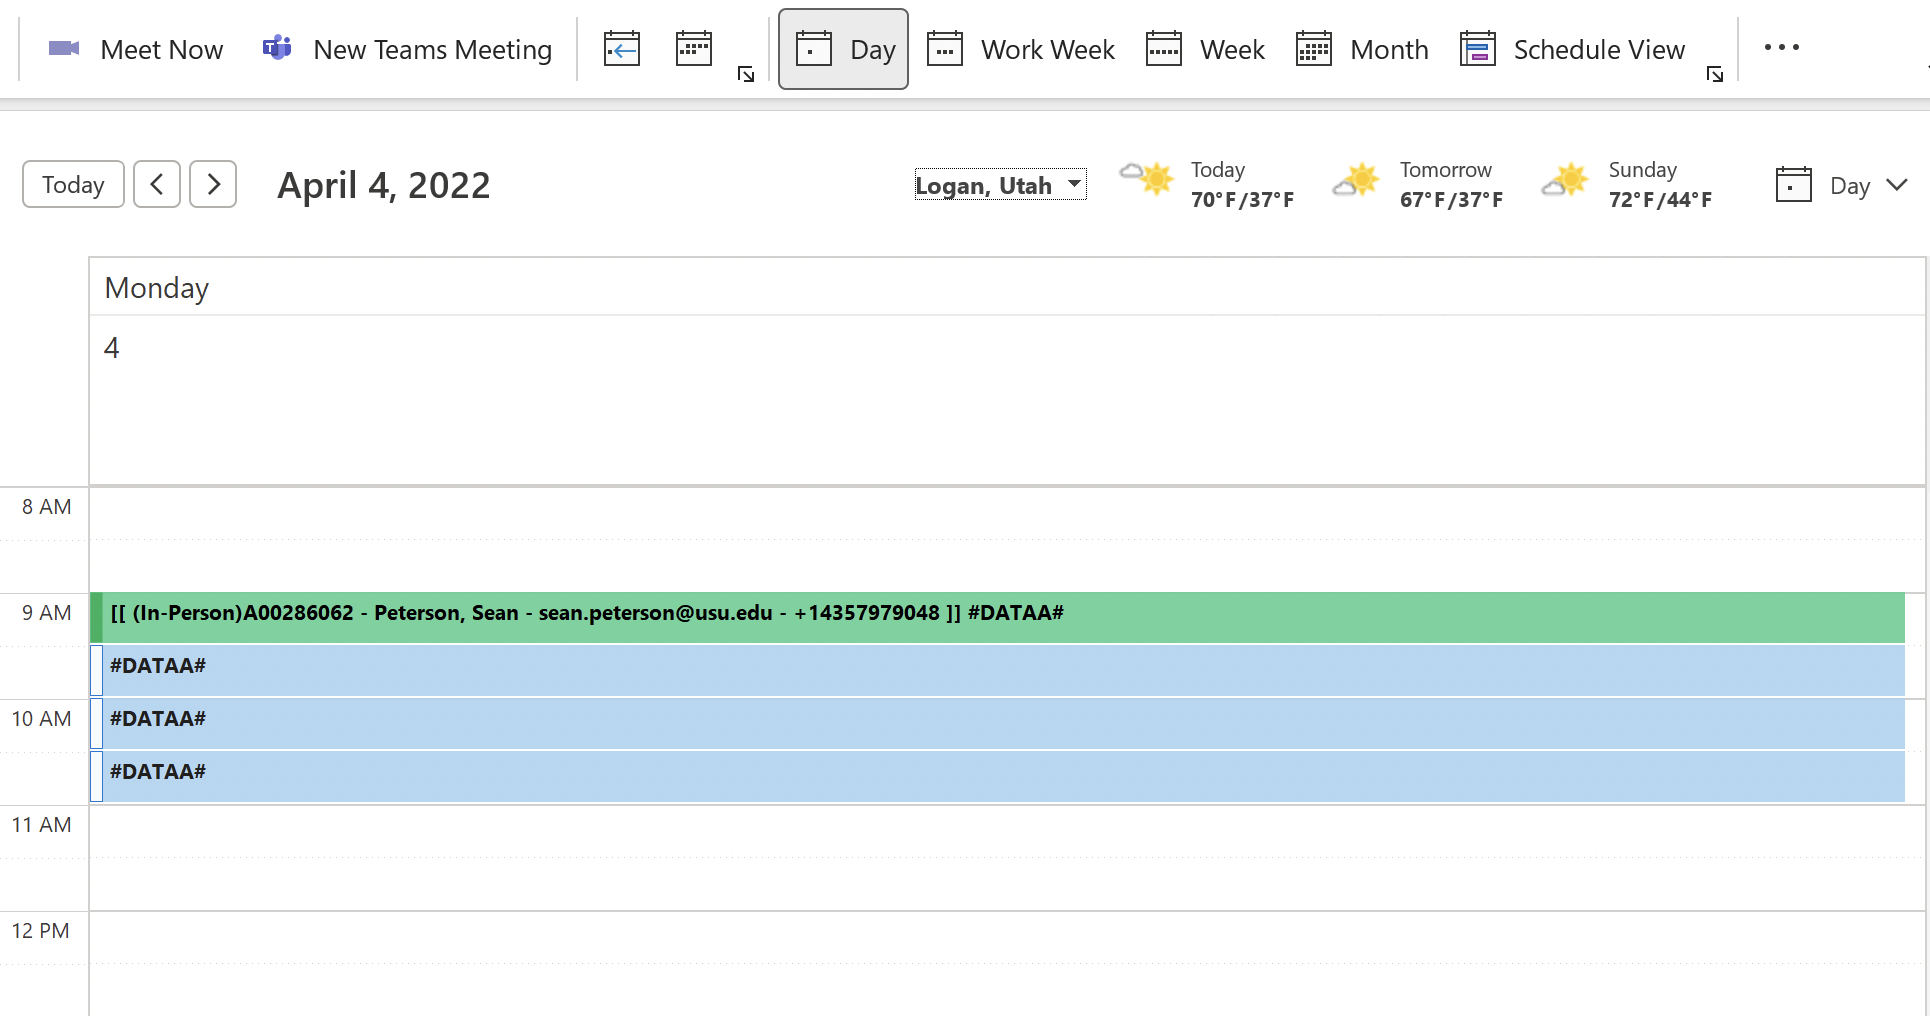 outlook calendar day view with reserved and open appointment blocks